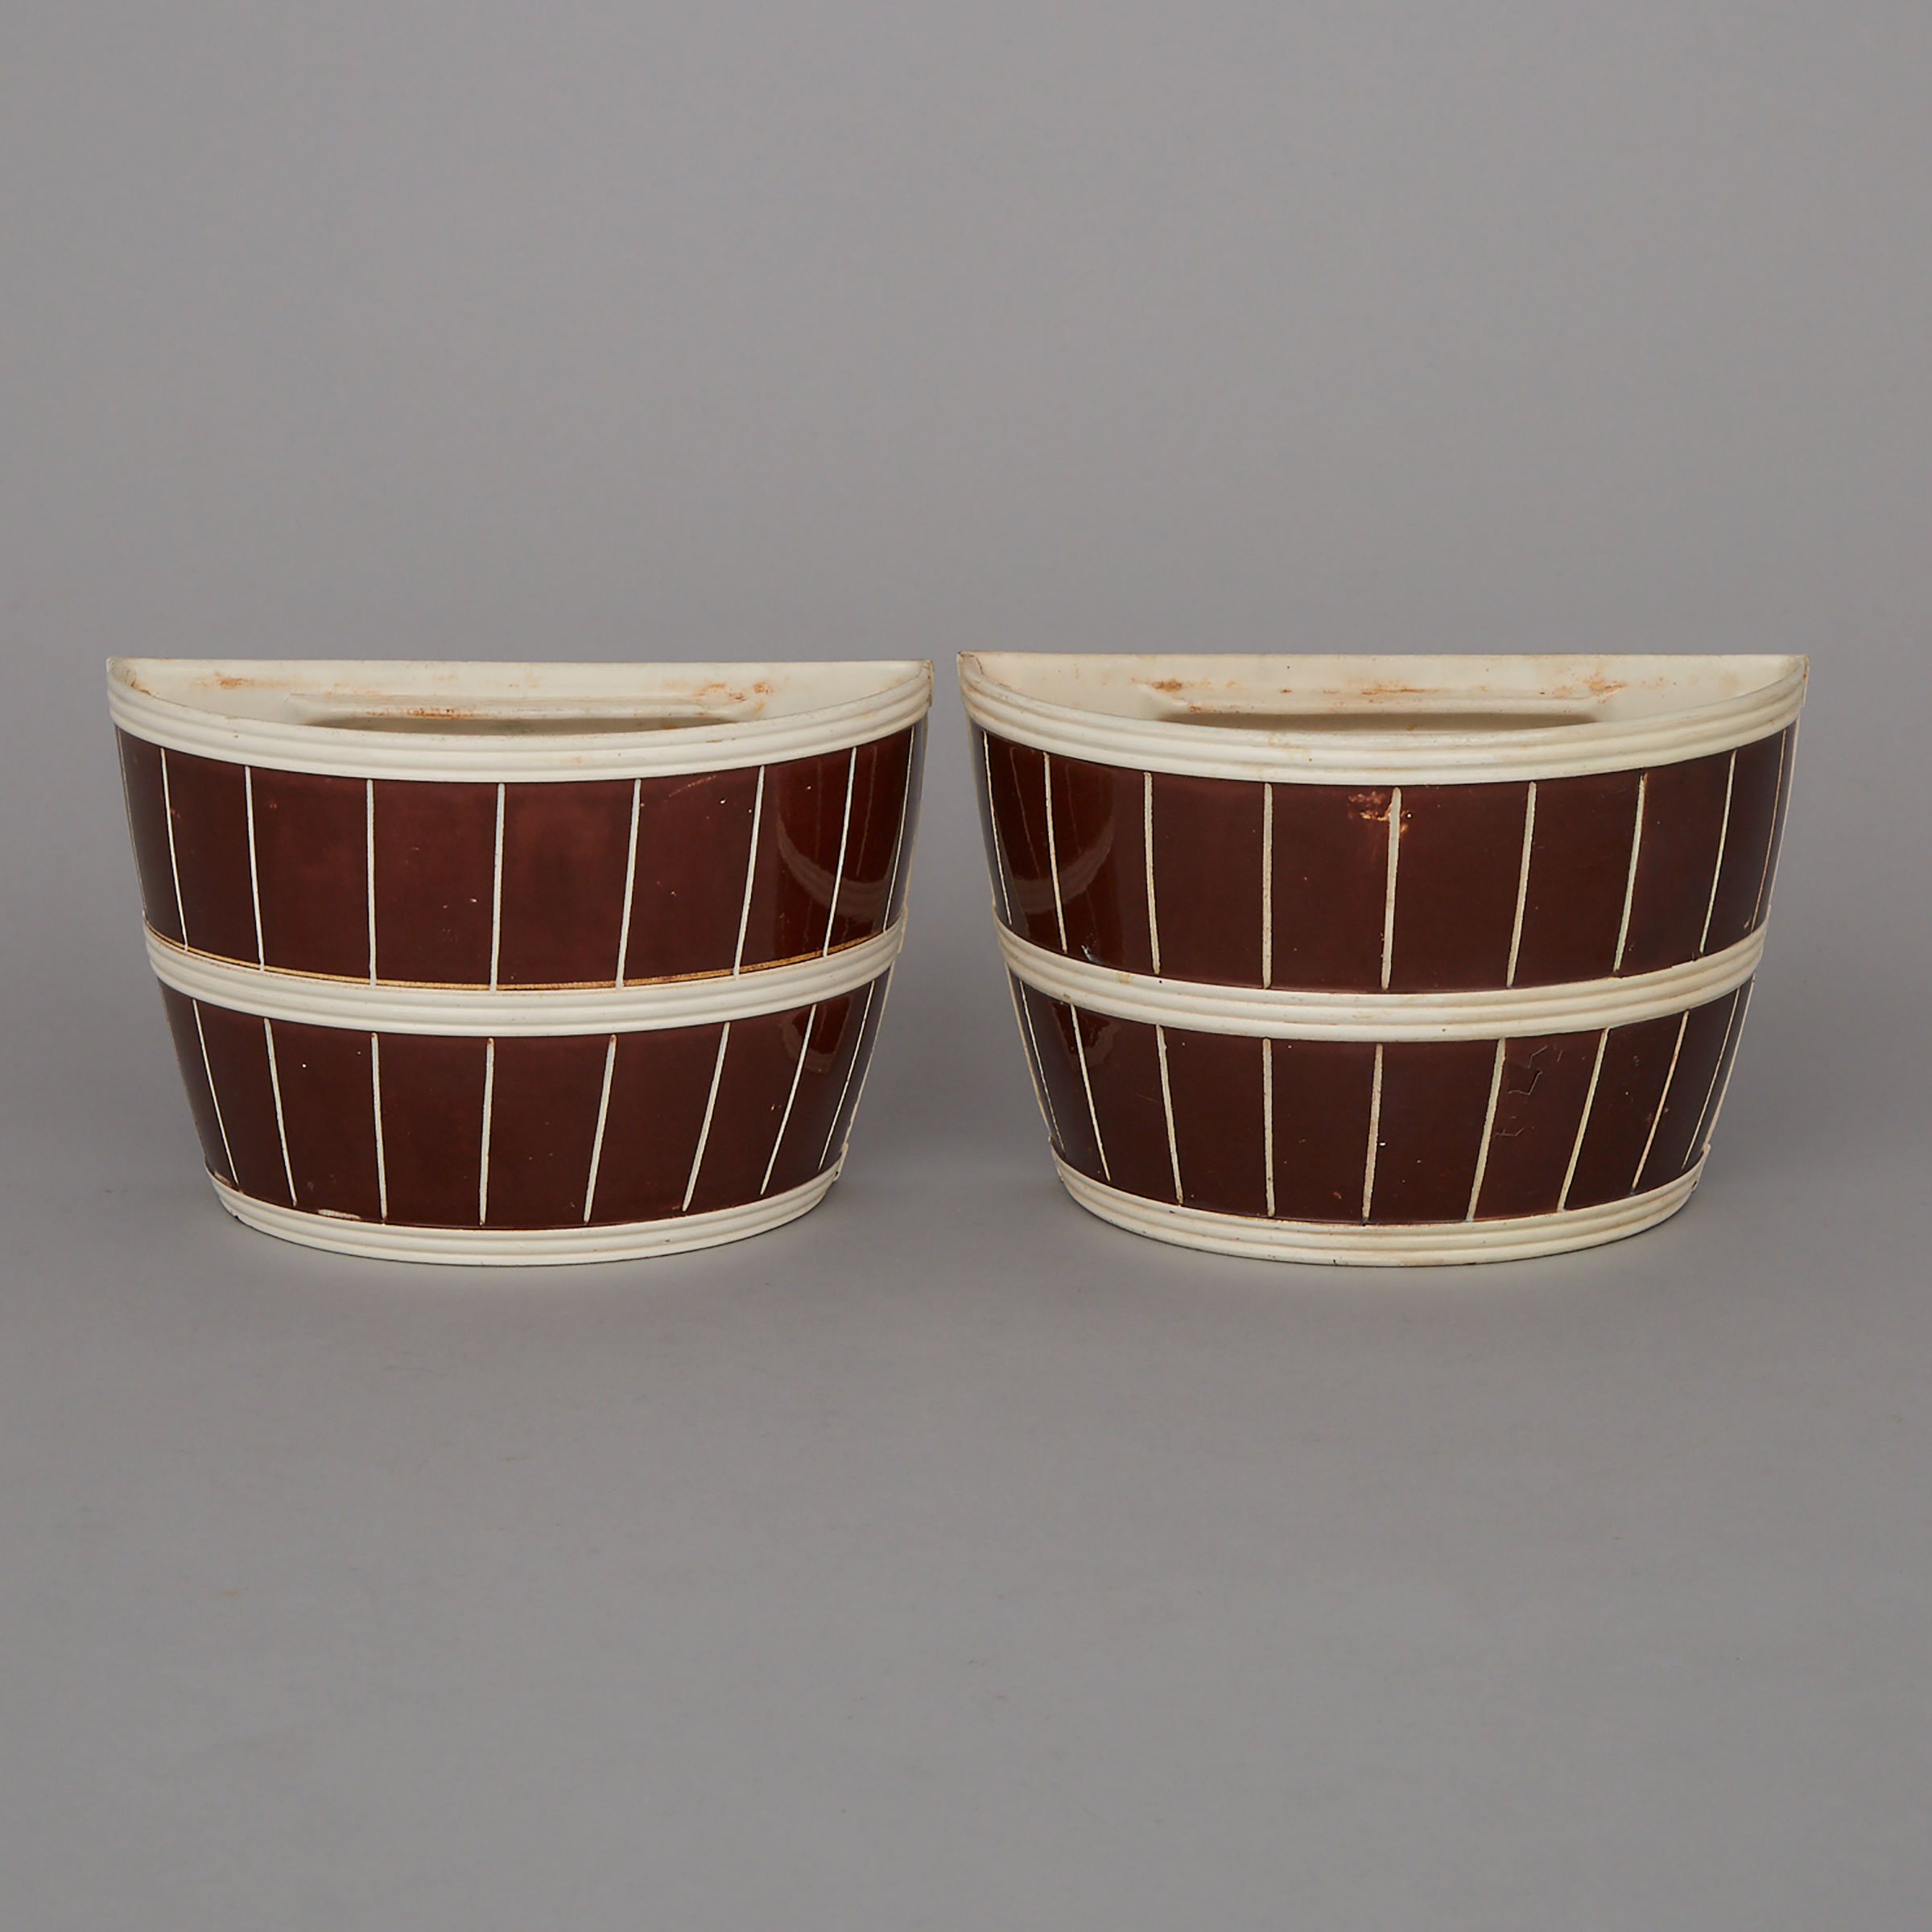 Pair of Wedgwood Brown Slip Decorated Bough Pots, late 18th century